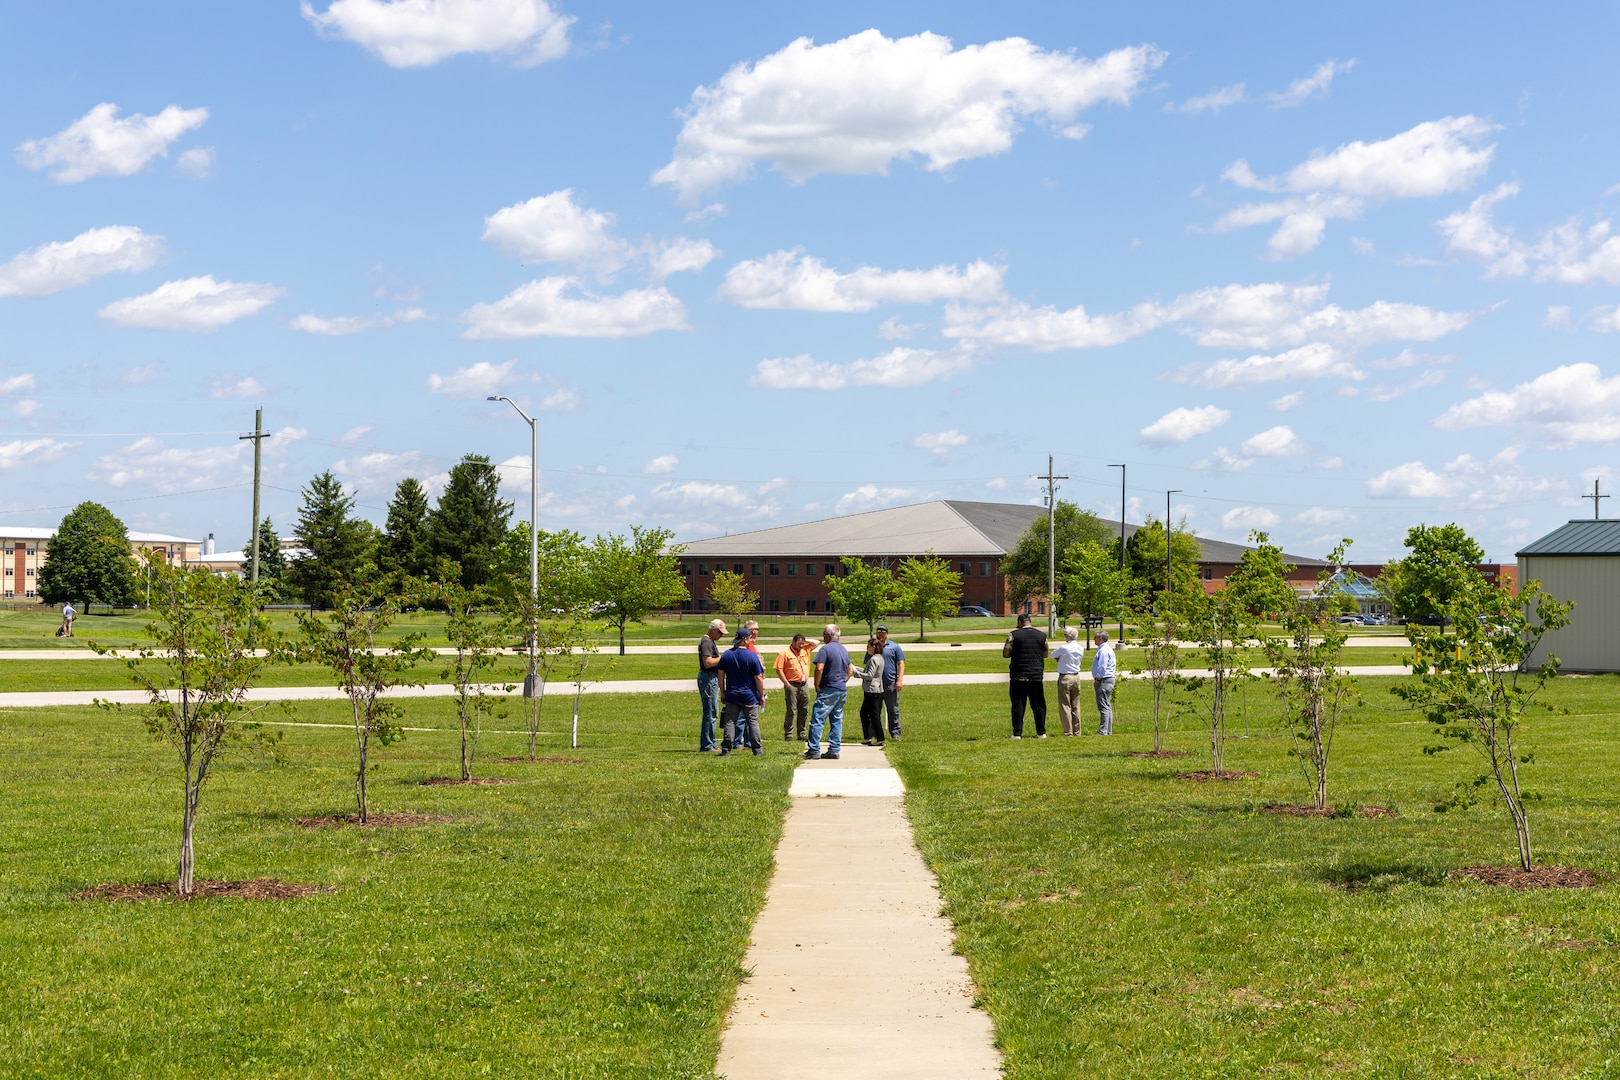 A group of people are seen in the middle of a path surrounded by newly planted trees. They are shown at an angle from far away.